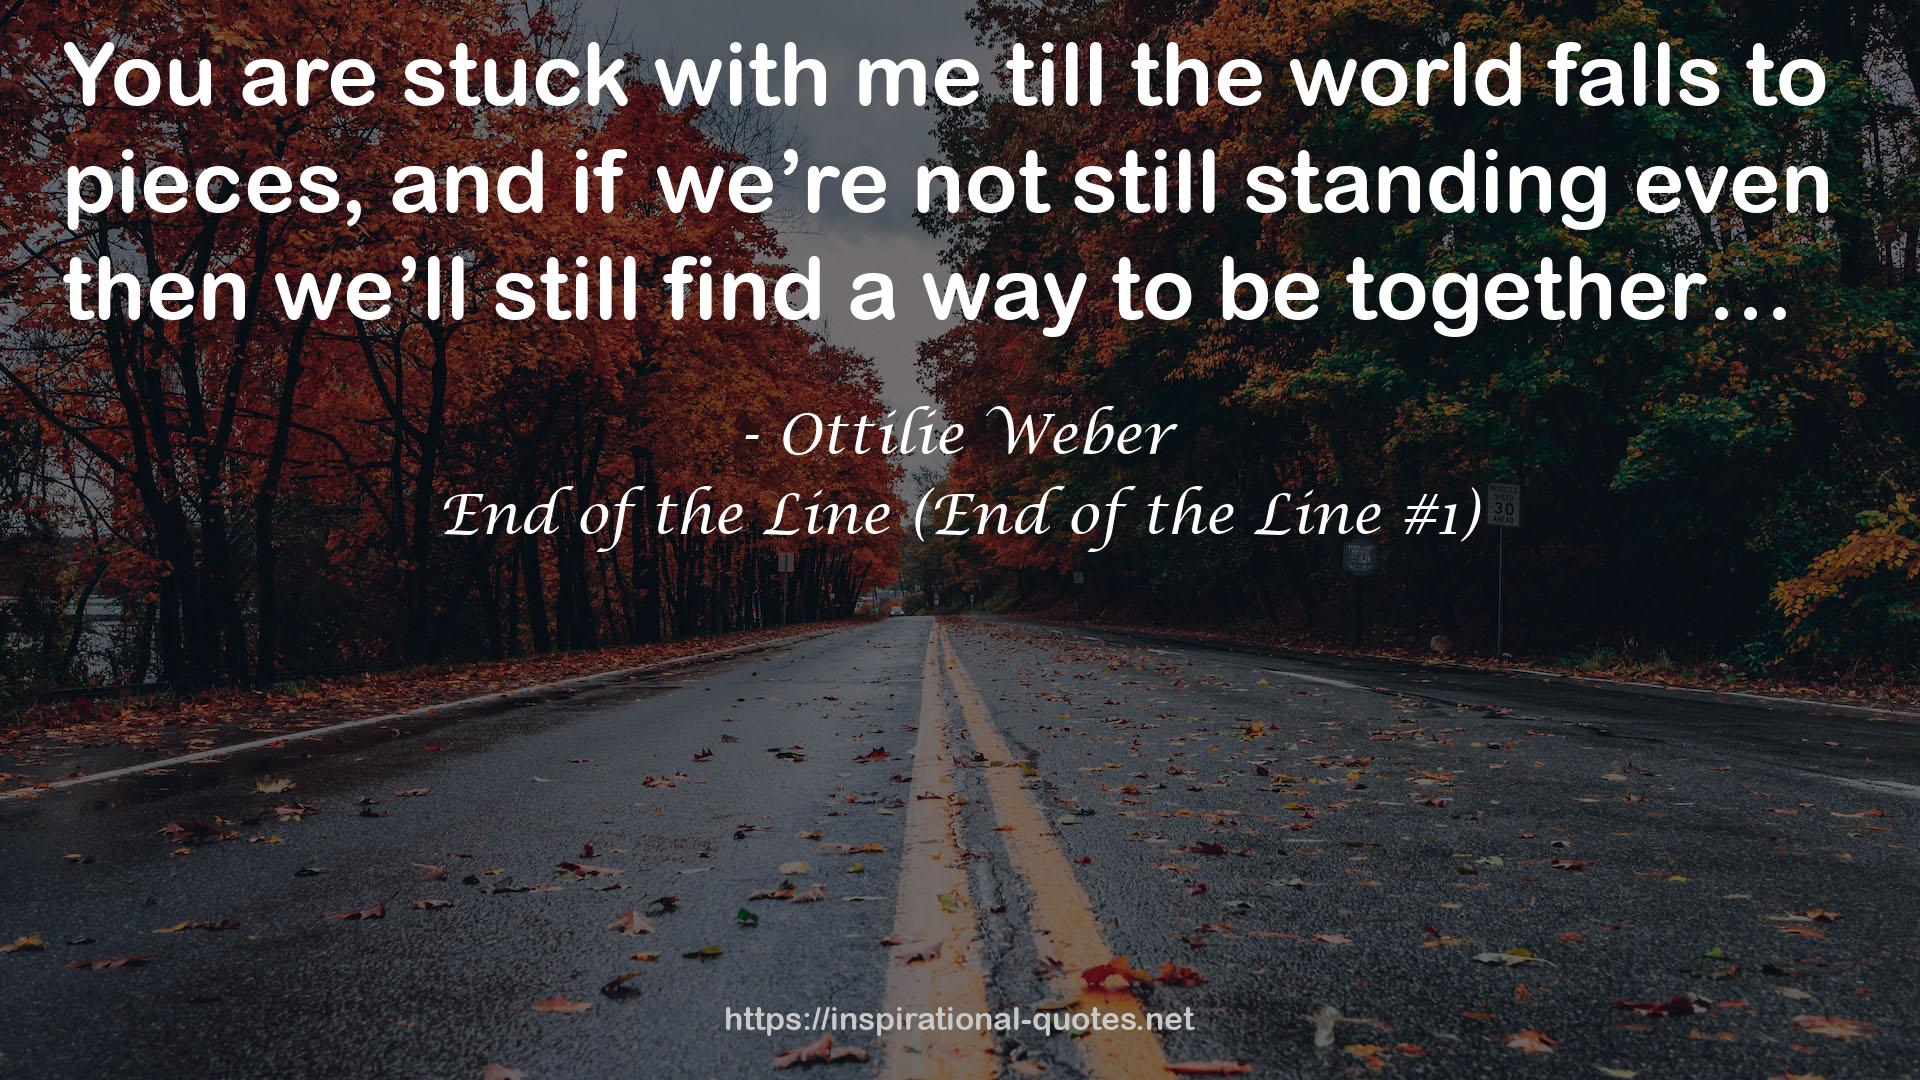 End of the Line (End of the Line #1) QUOTES